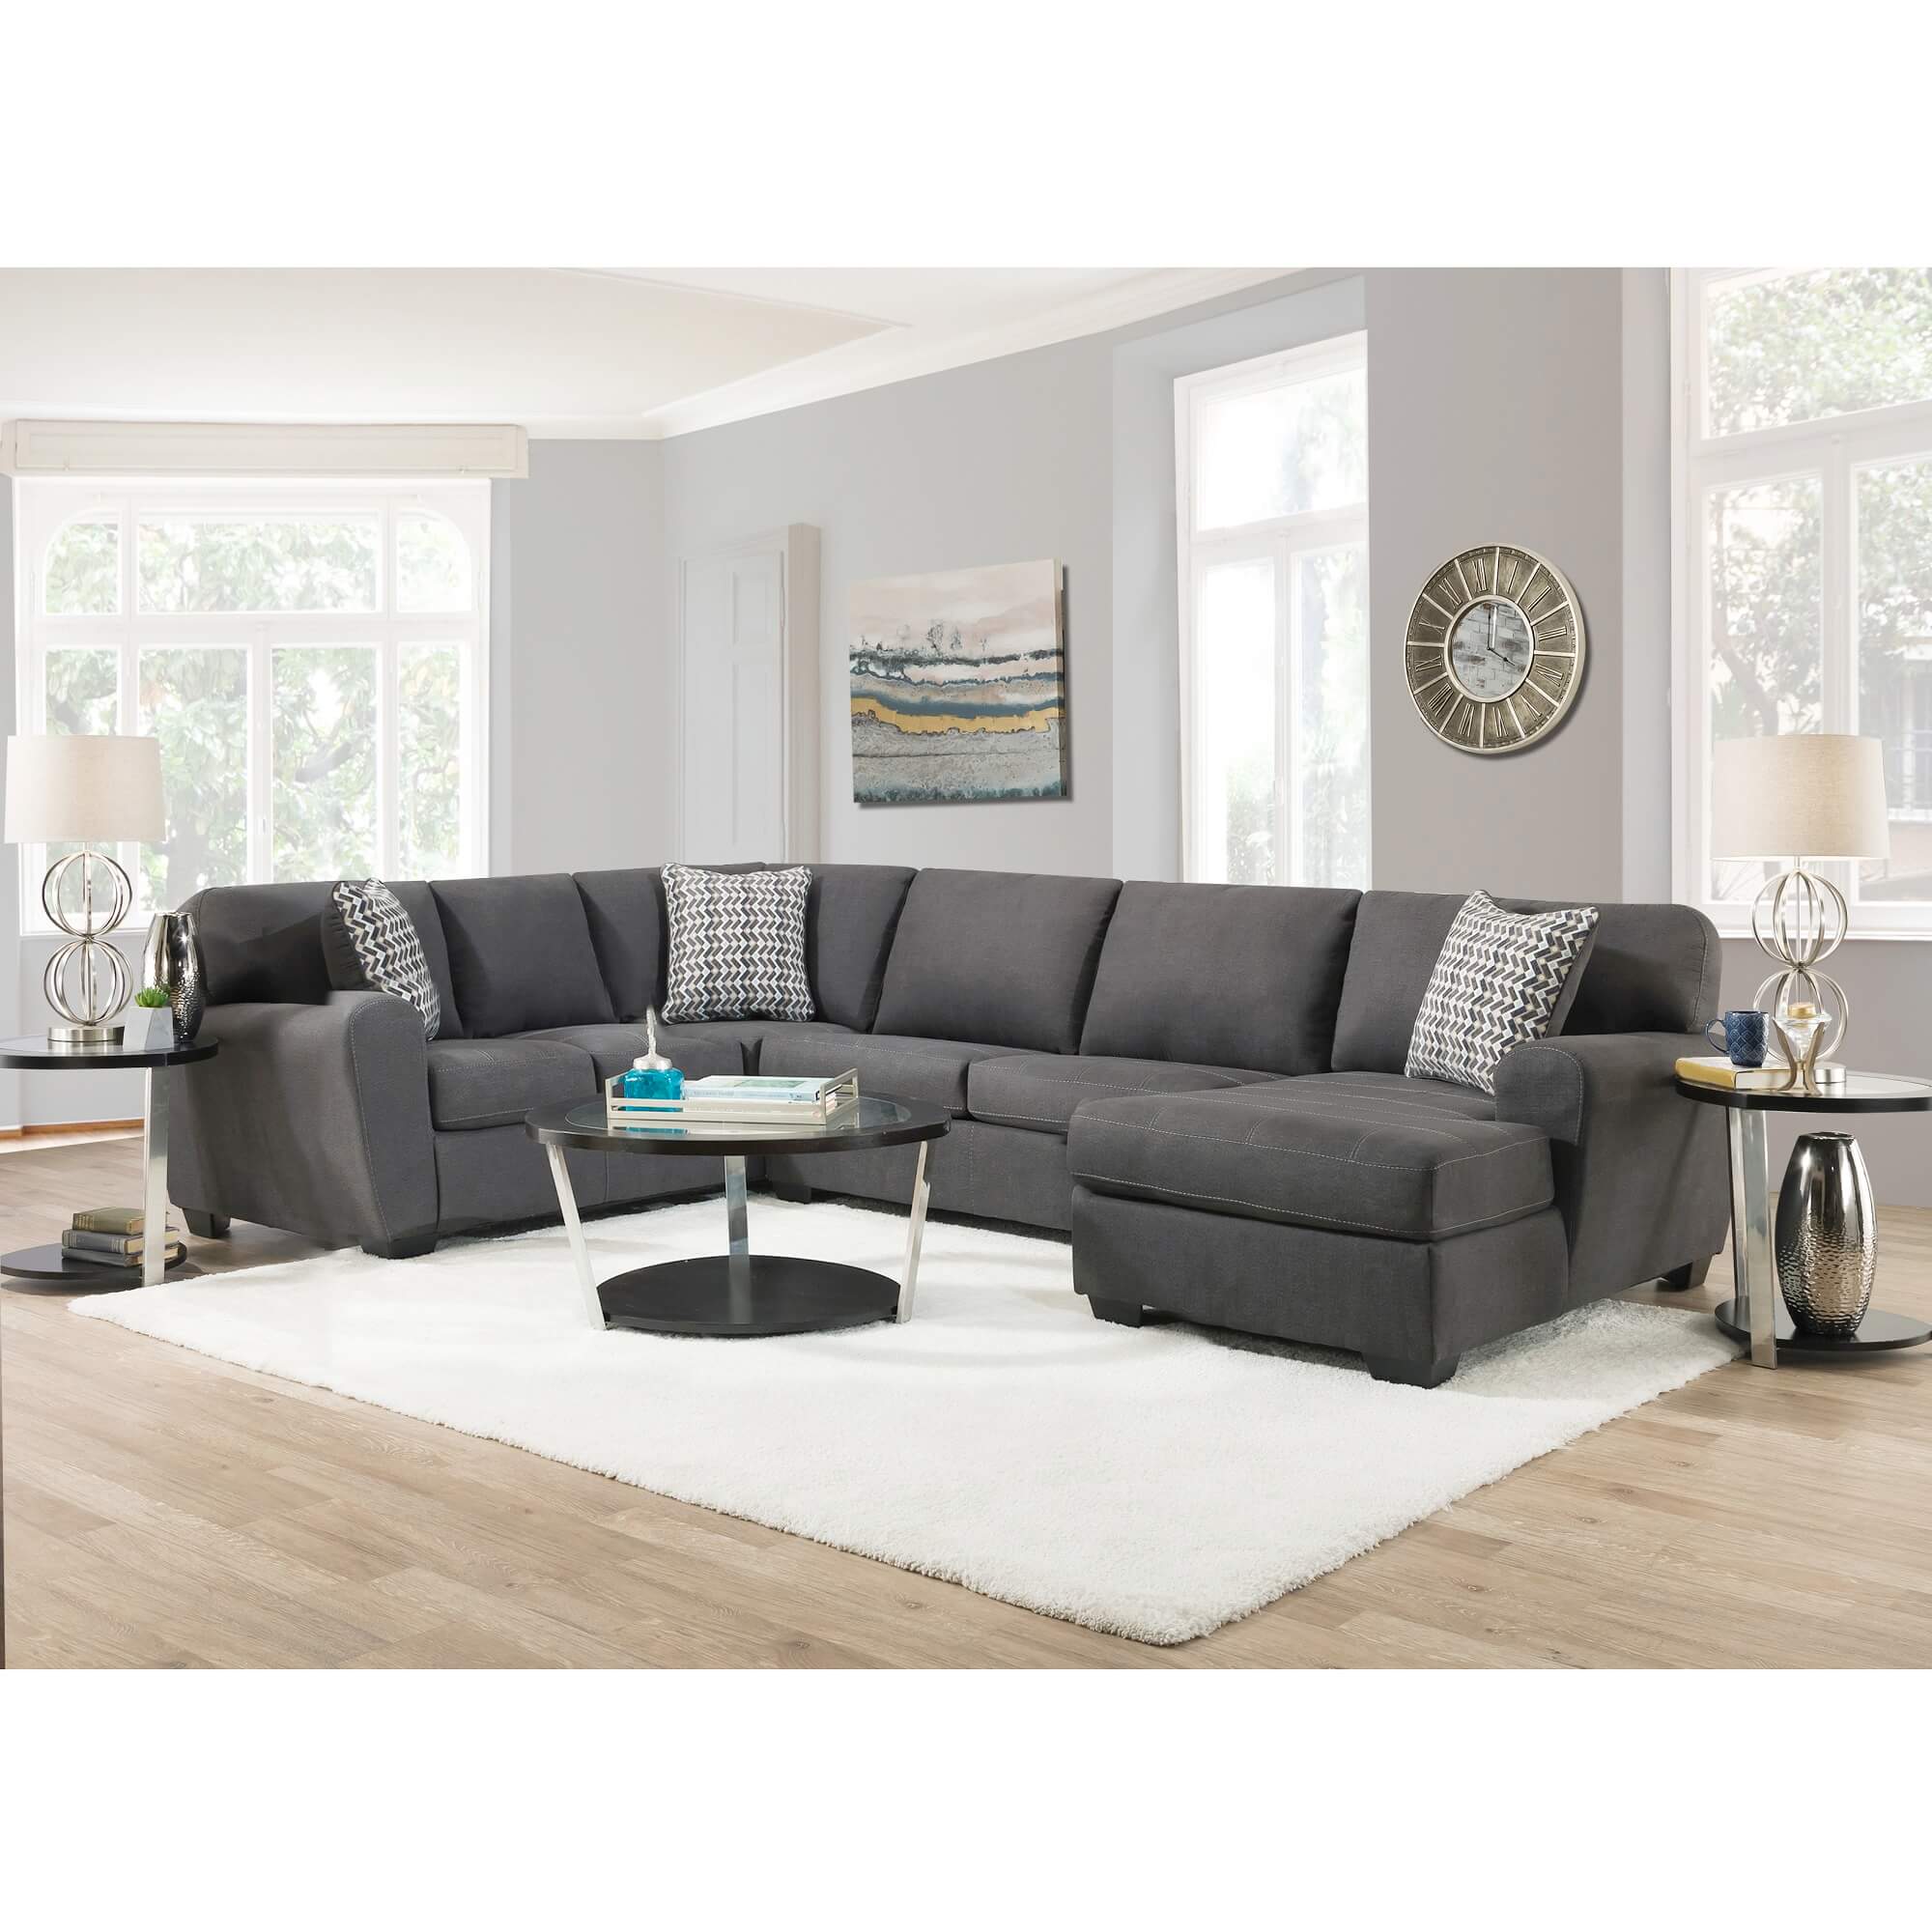 Living Room Sectional Furniture Sets / China Apartment Living Room